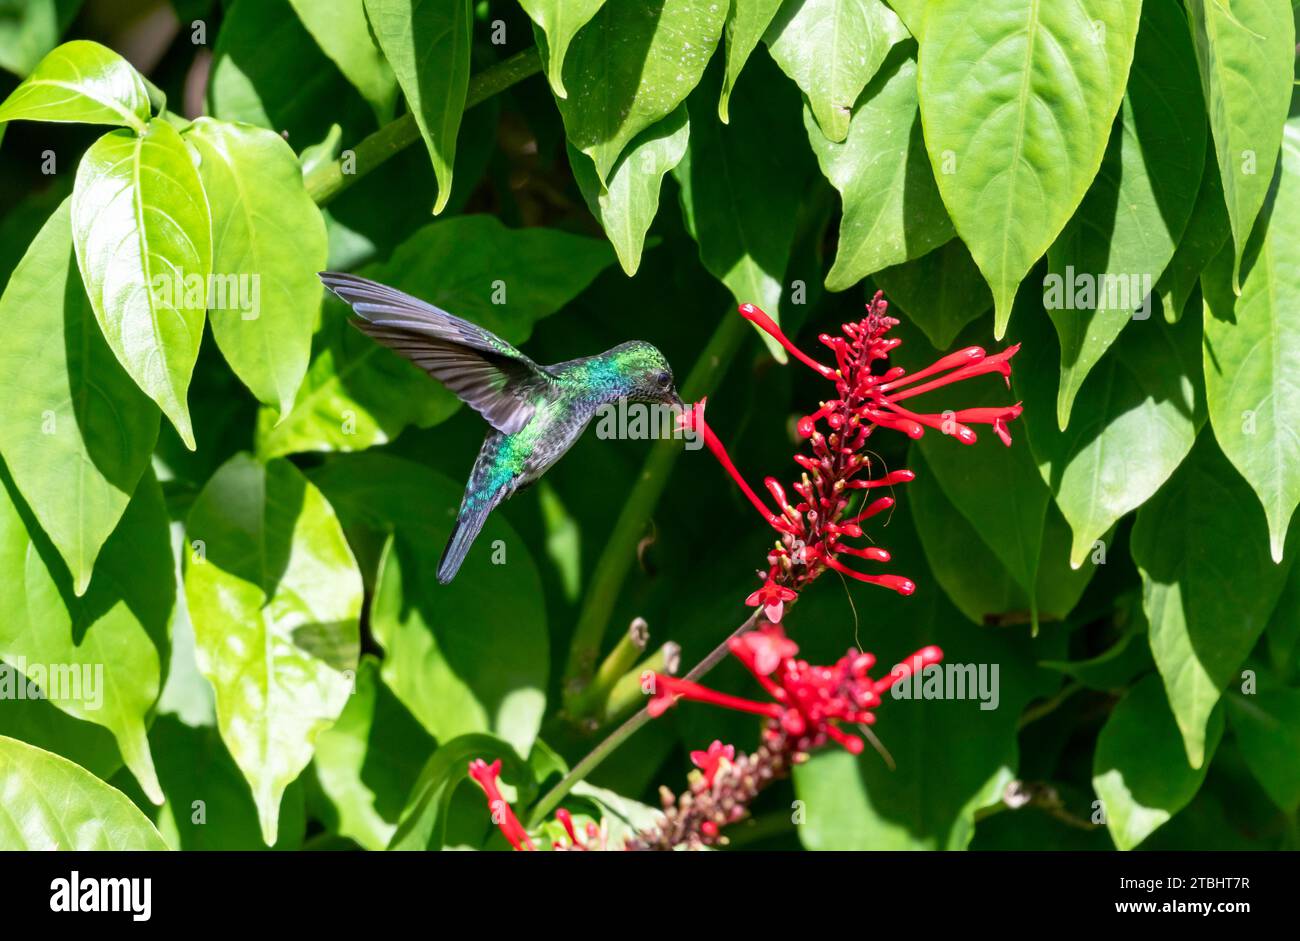 Blue-chinned Sapphire hummingbird, Chlorestes Notata, feeding on red flowers framed with green leaves Stock Photo